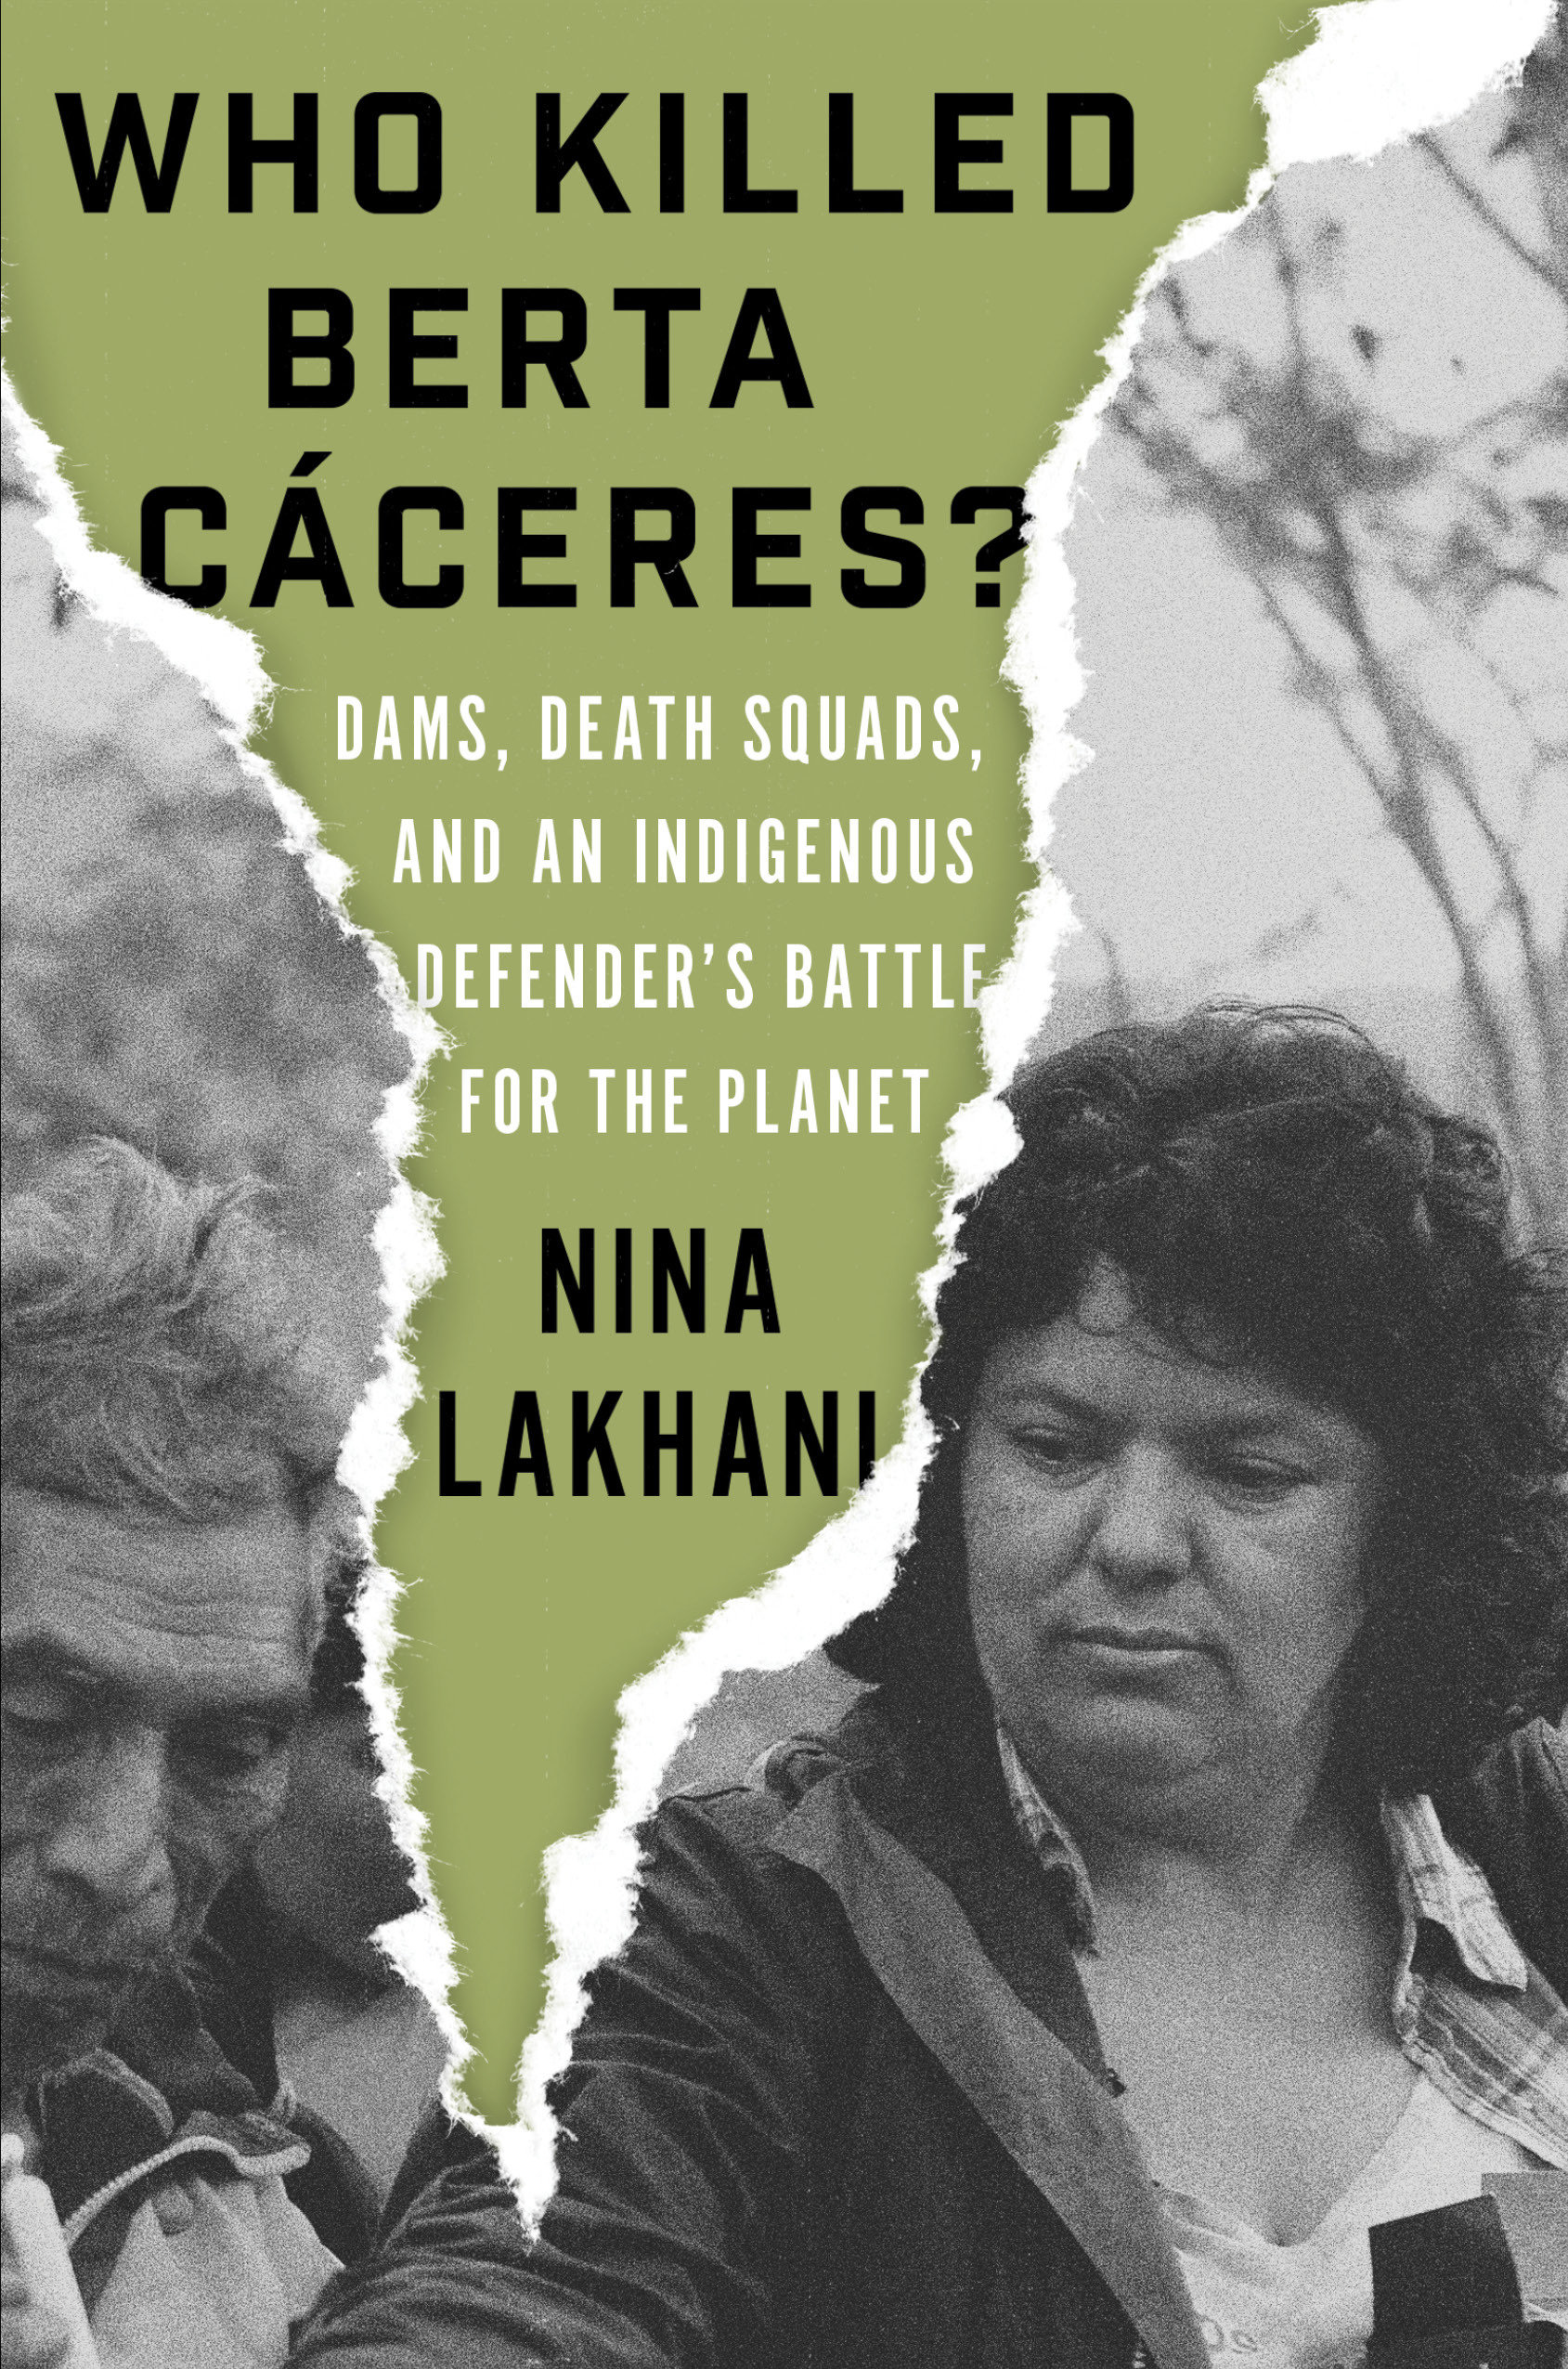 Who Killed Berta Caceres? (Hardcover Book)